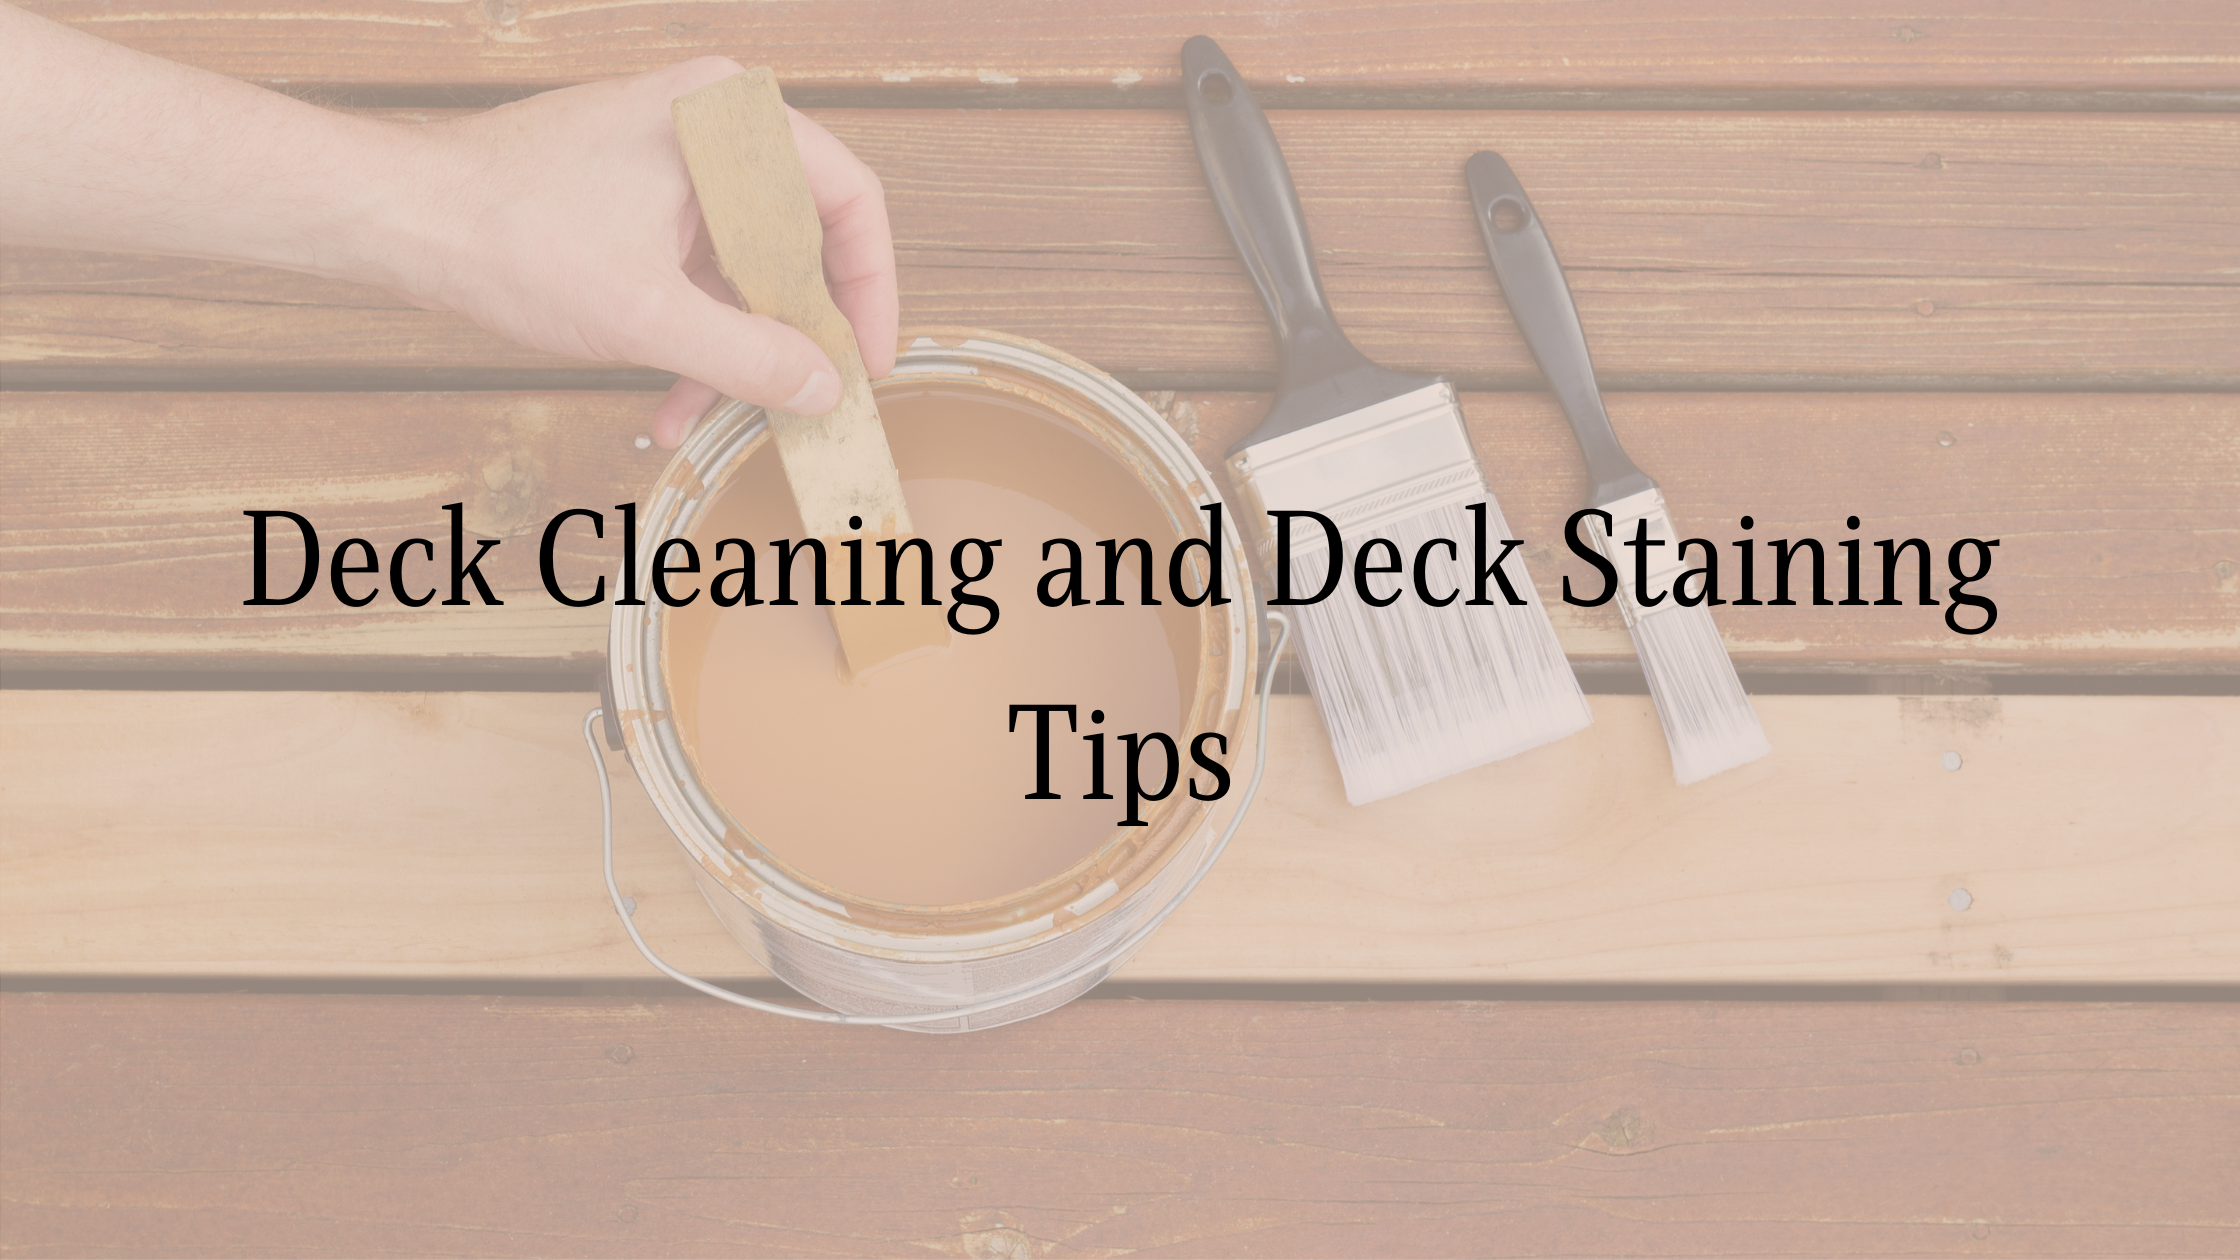 https://handymanconnection.com/wp-content/uploads/2021/05/Deck-Cleaning-and-Deck-Staining-Tips.png